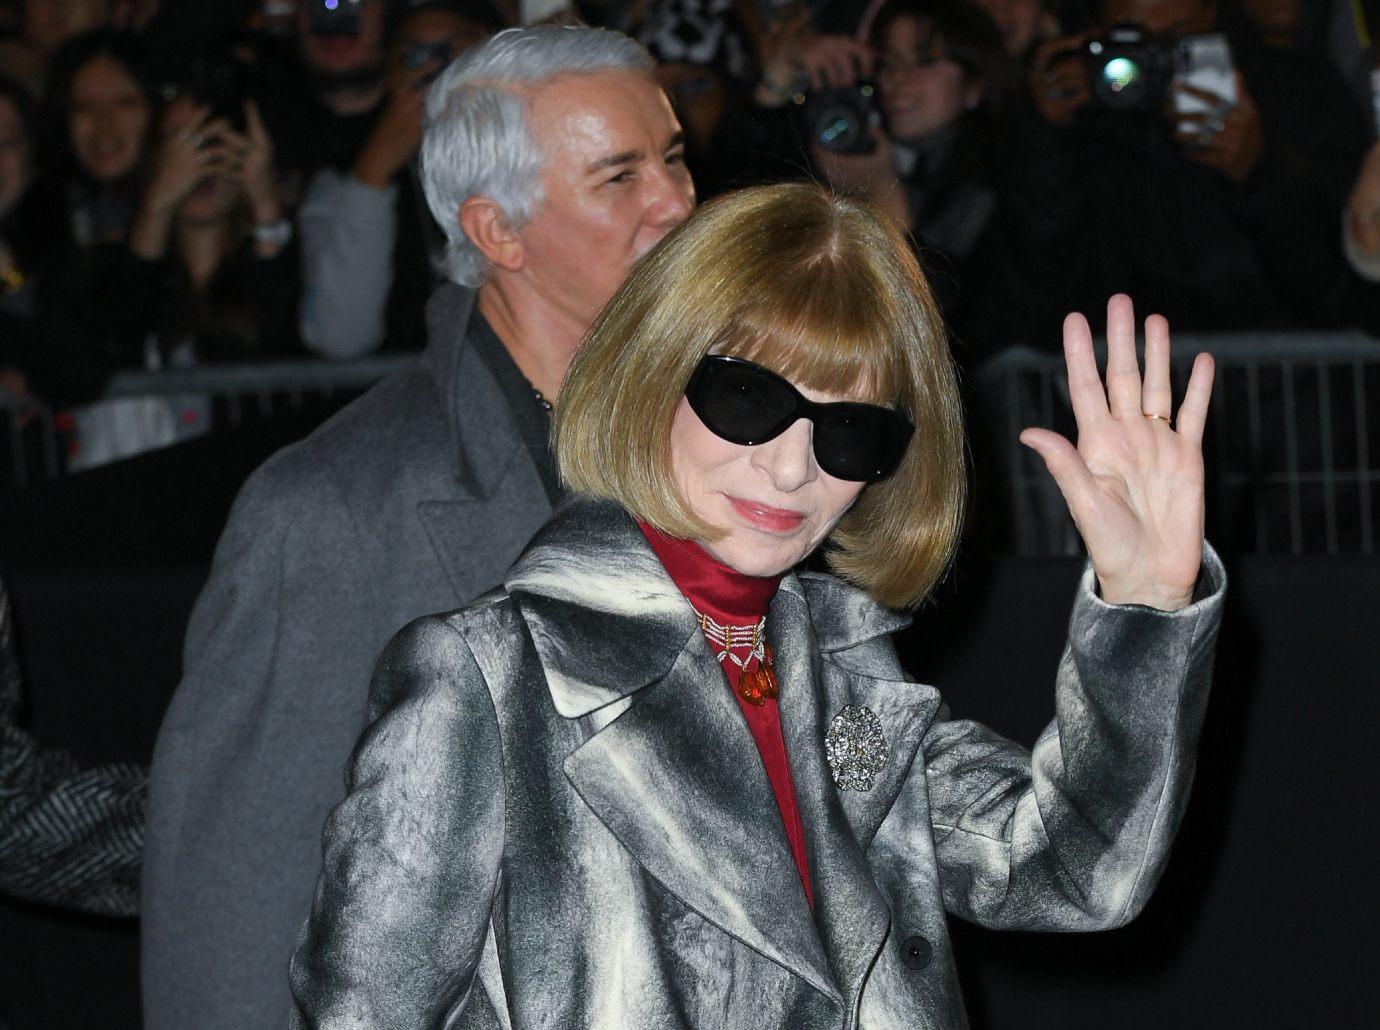 Paul McCartney Not Impressed With Anna Wintour At Paris Fashion Show